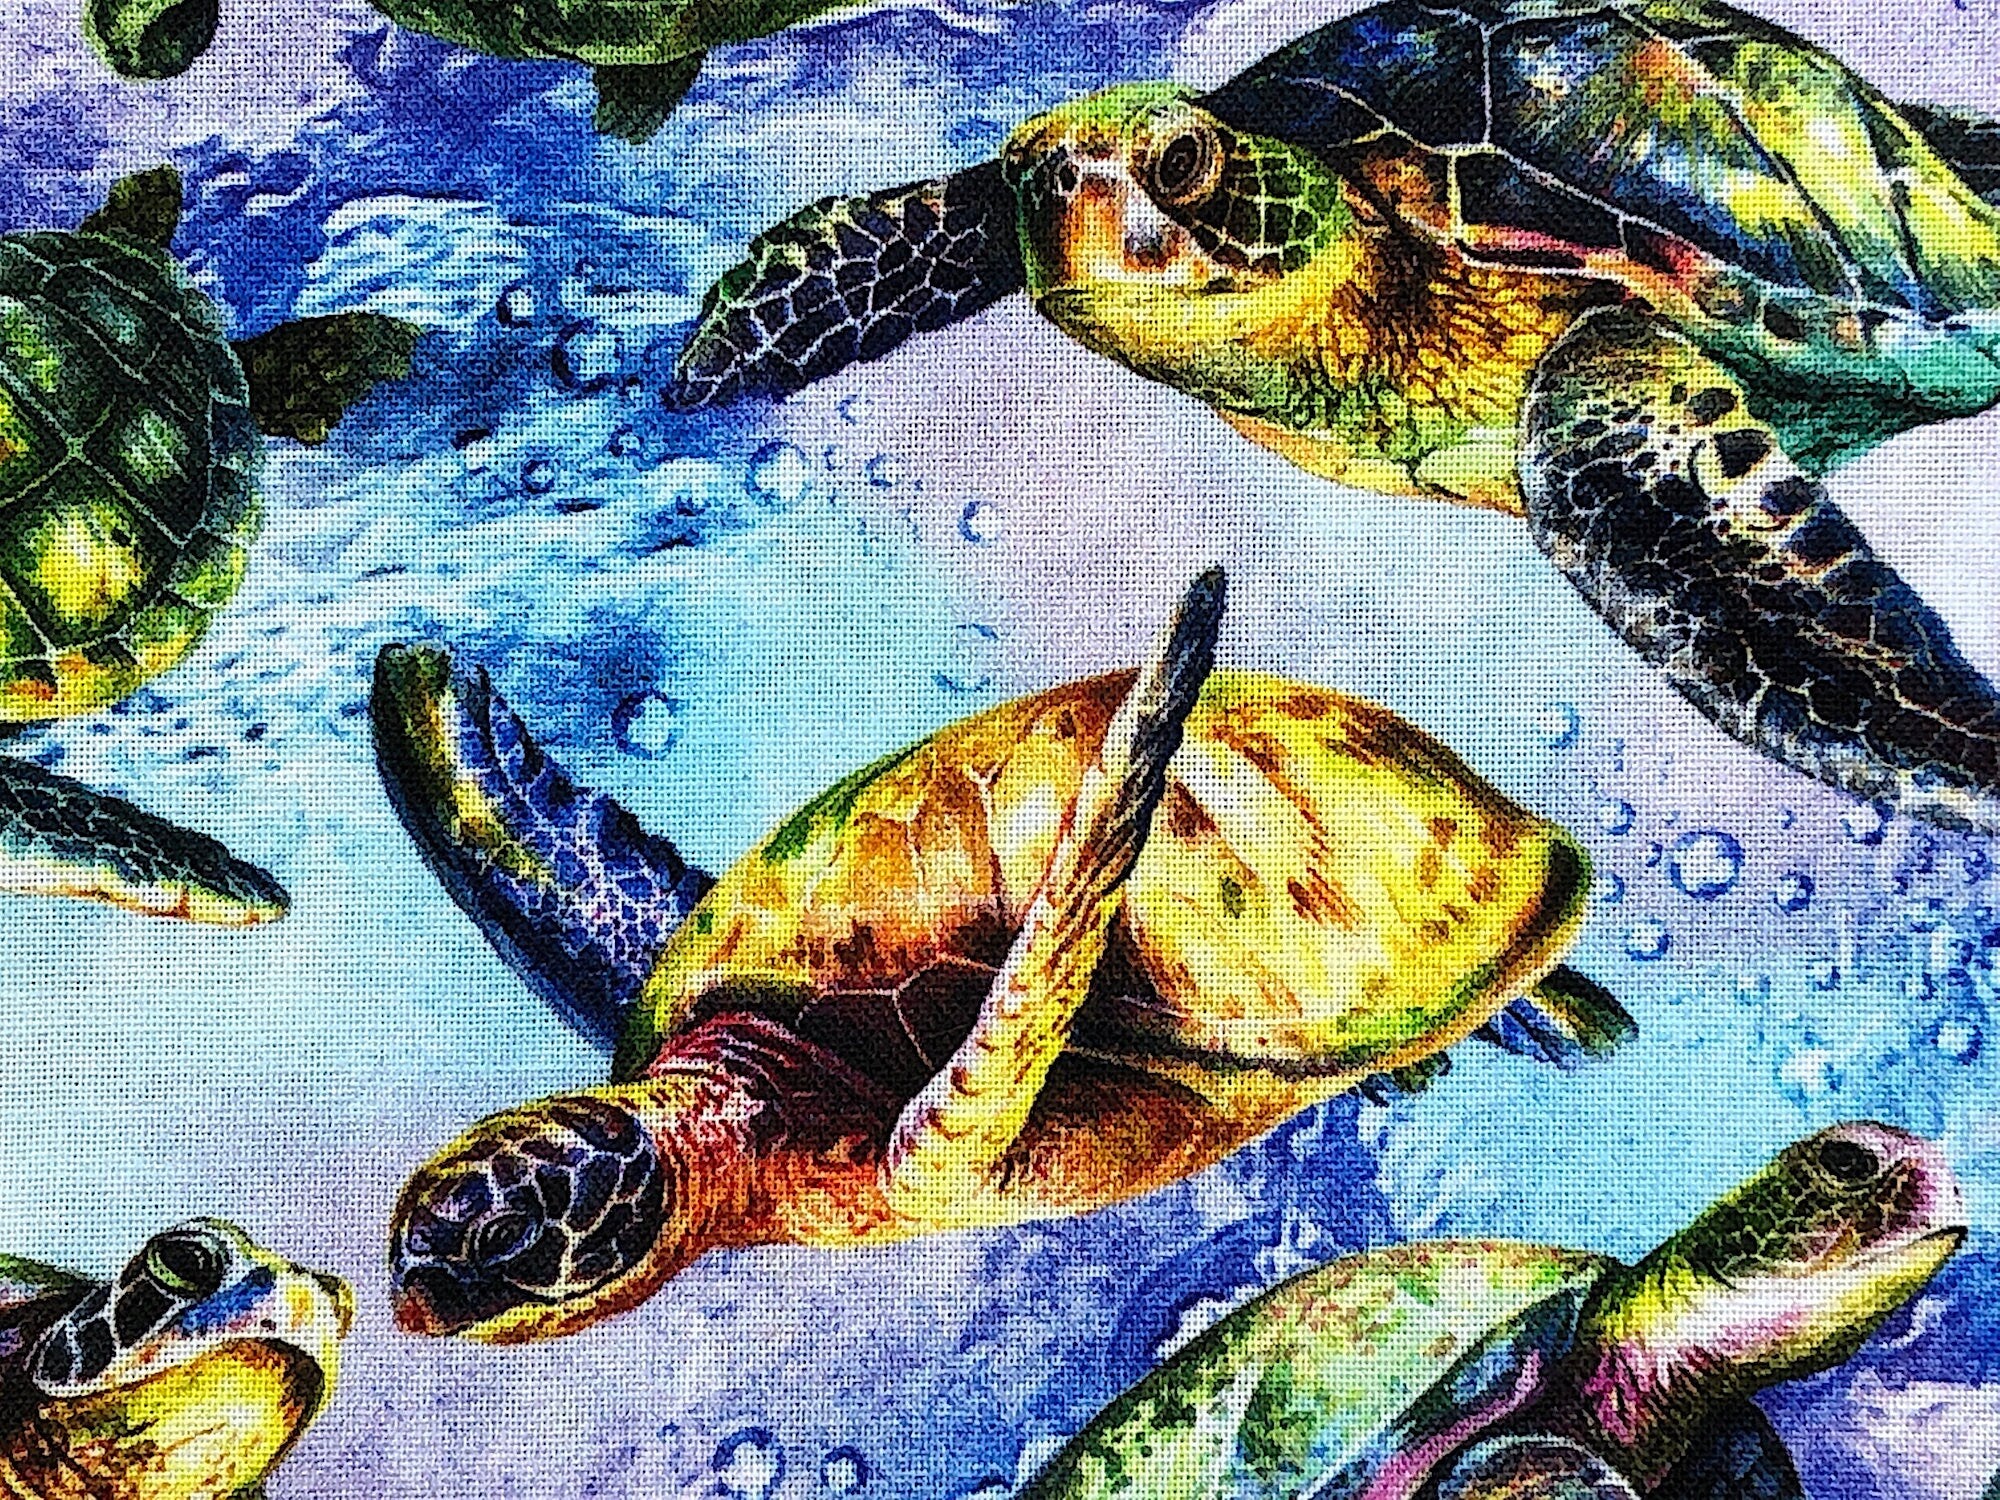 Close up of turtles swimming in the water.